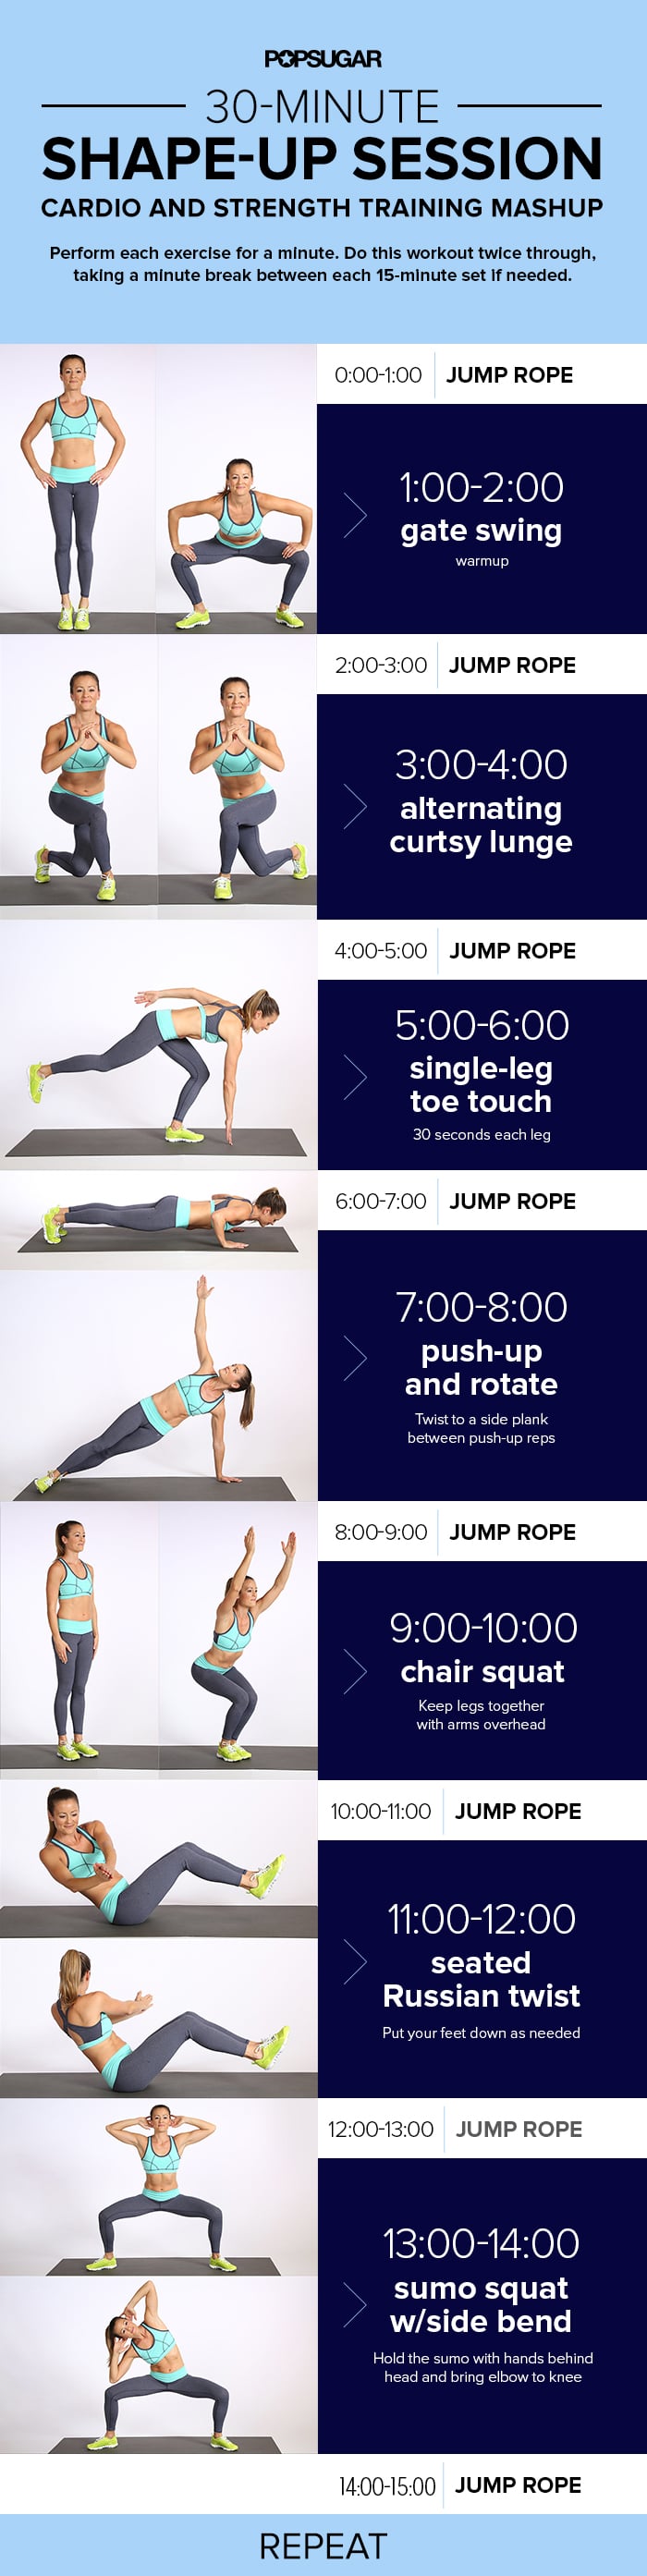 best-workout-posters-popsugar-fitness-photo-30